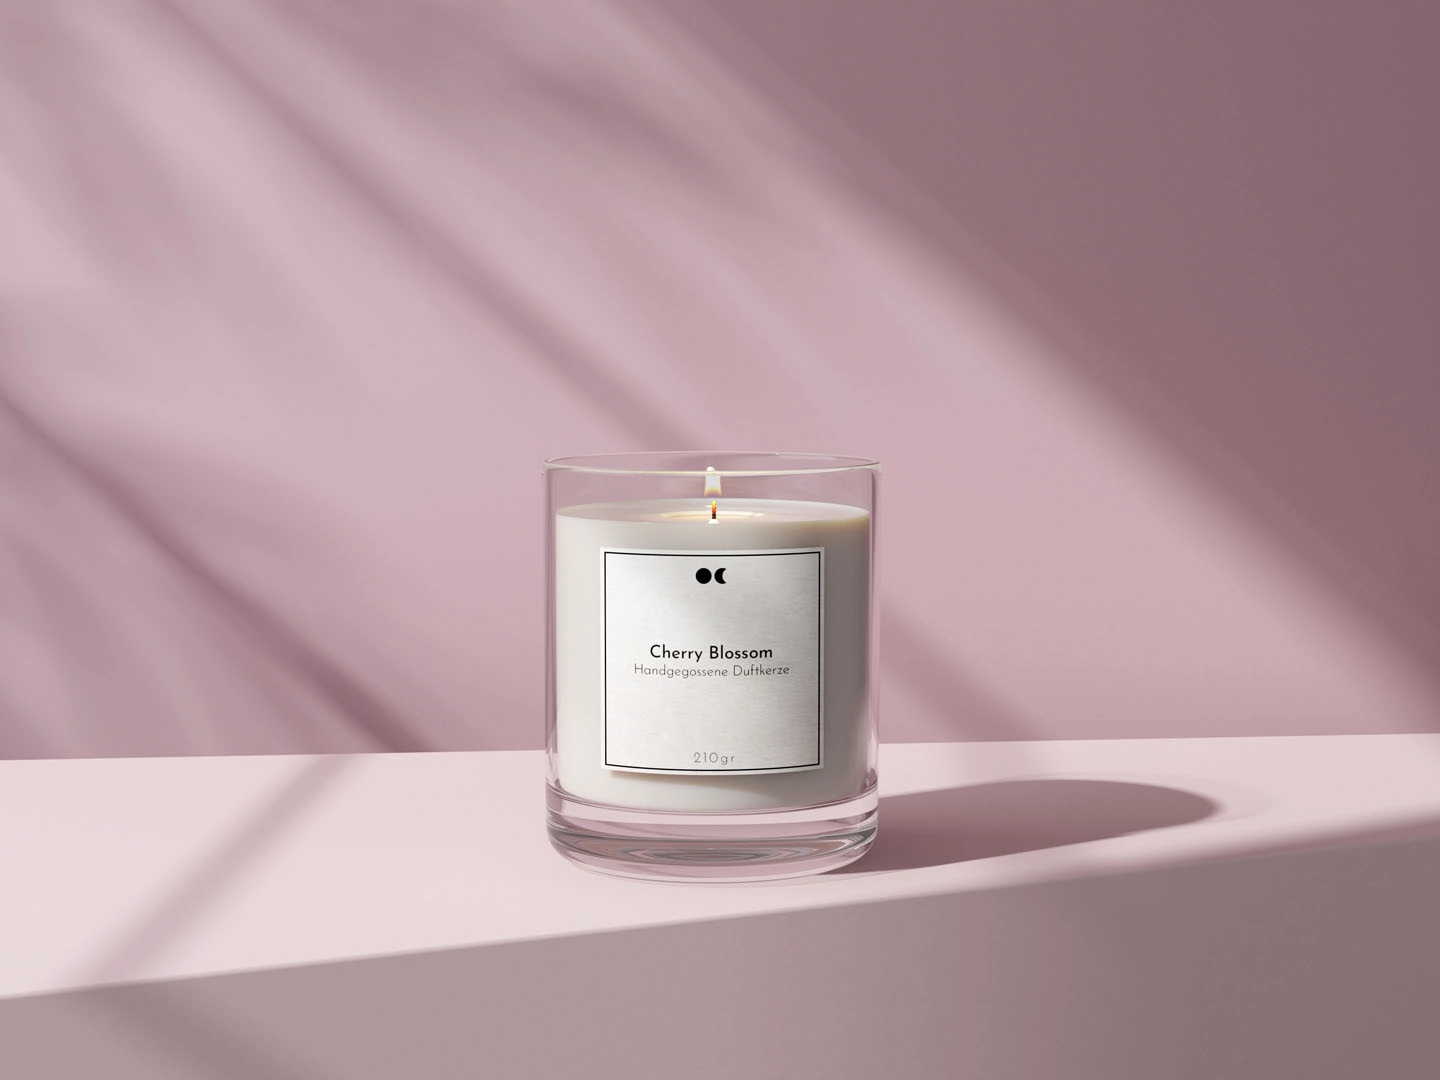 Scented candle in a jar - Cherry Blossom